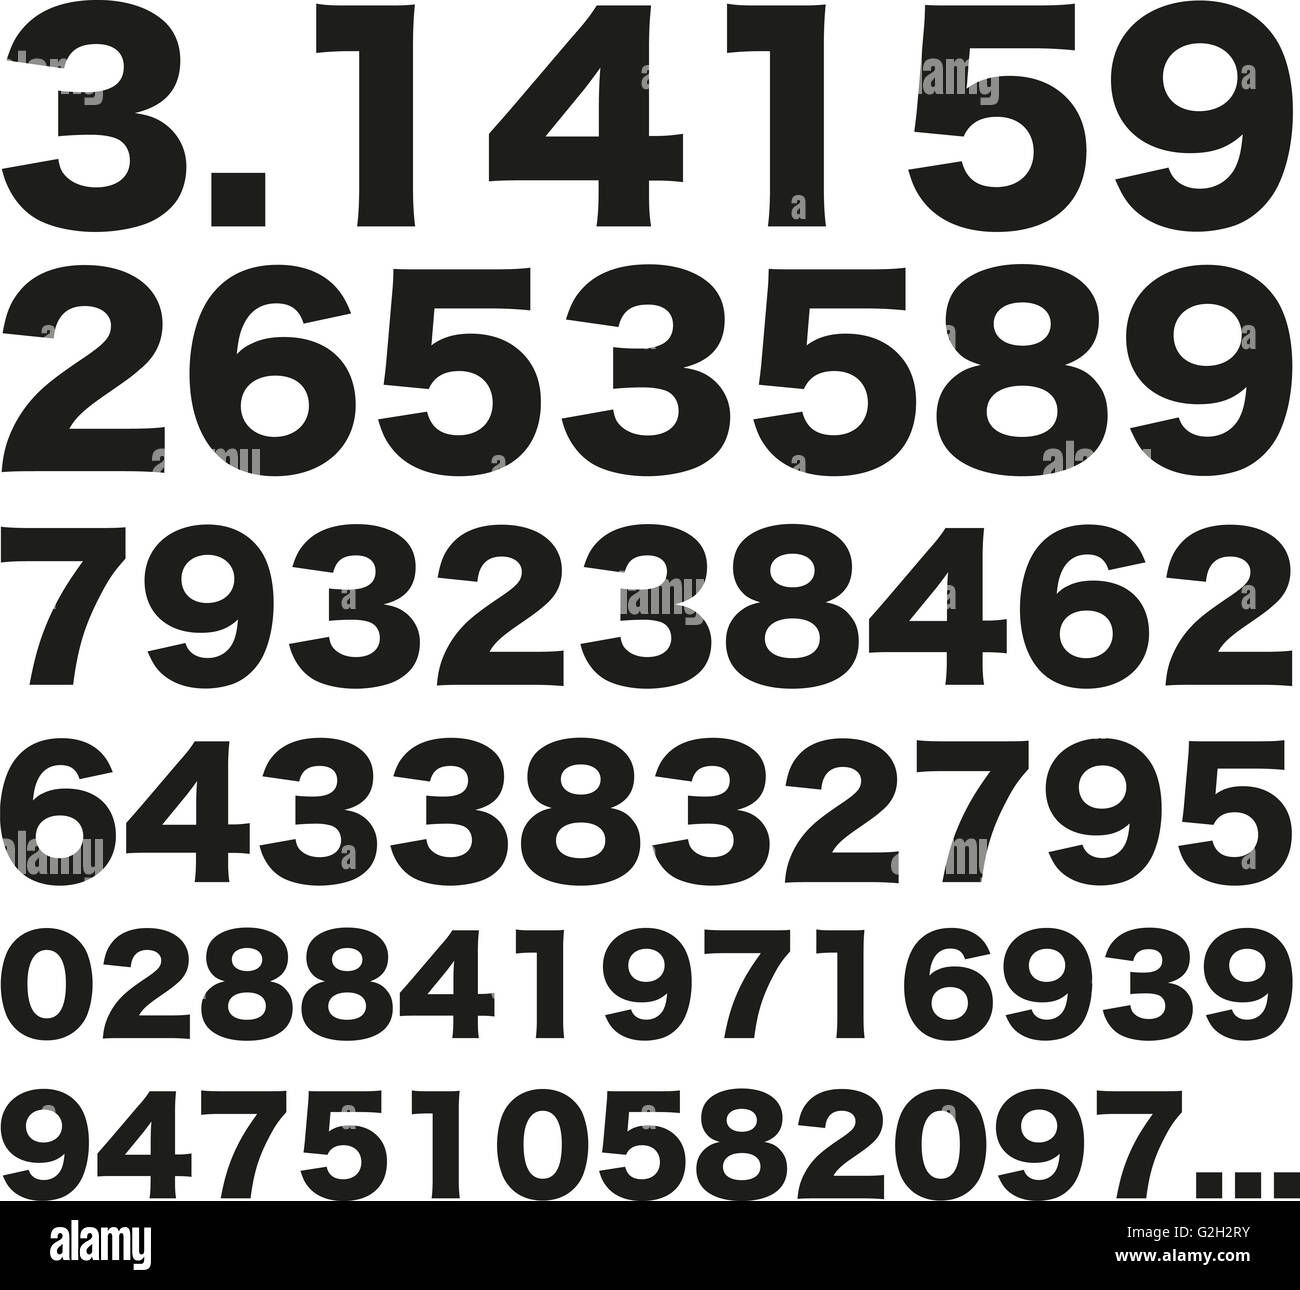 Pi number 3.141592653589 Stock Photo